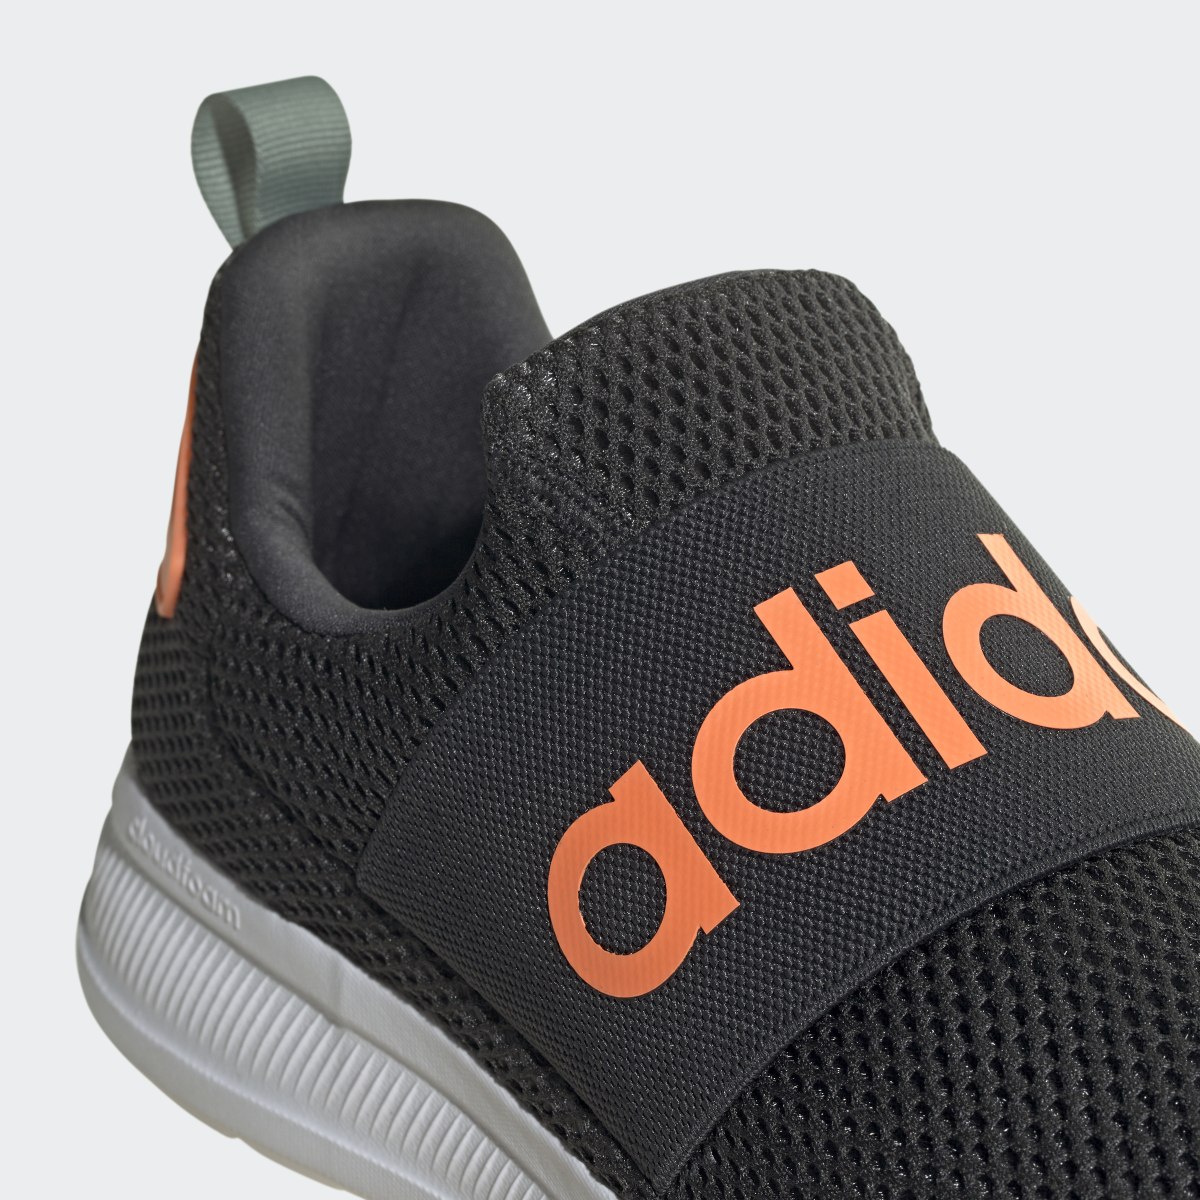 Adidas Lite Racer Adapt 4.0 Shoes. 8